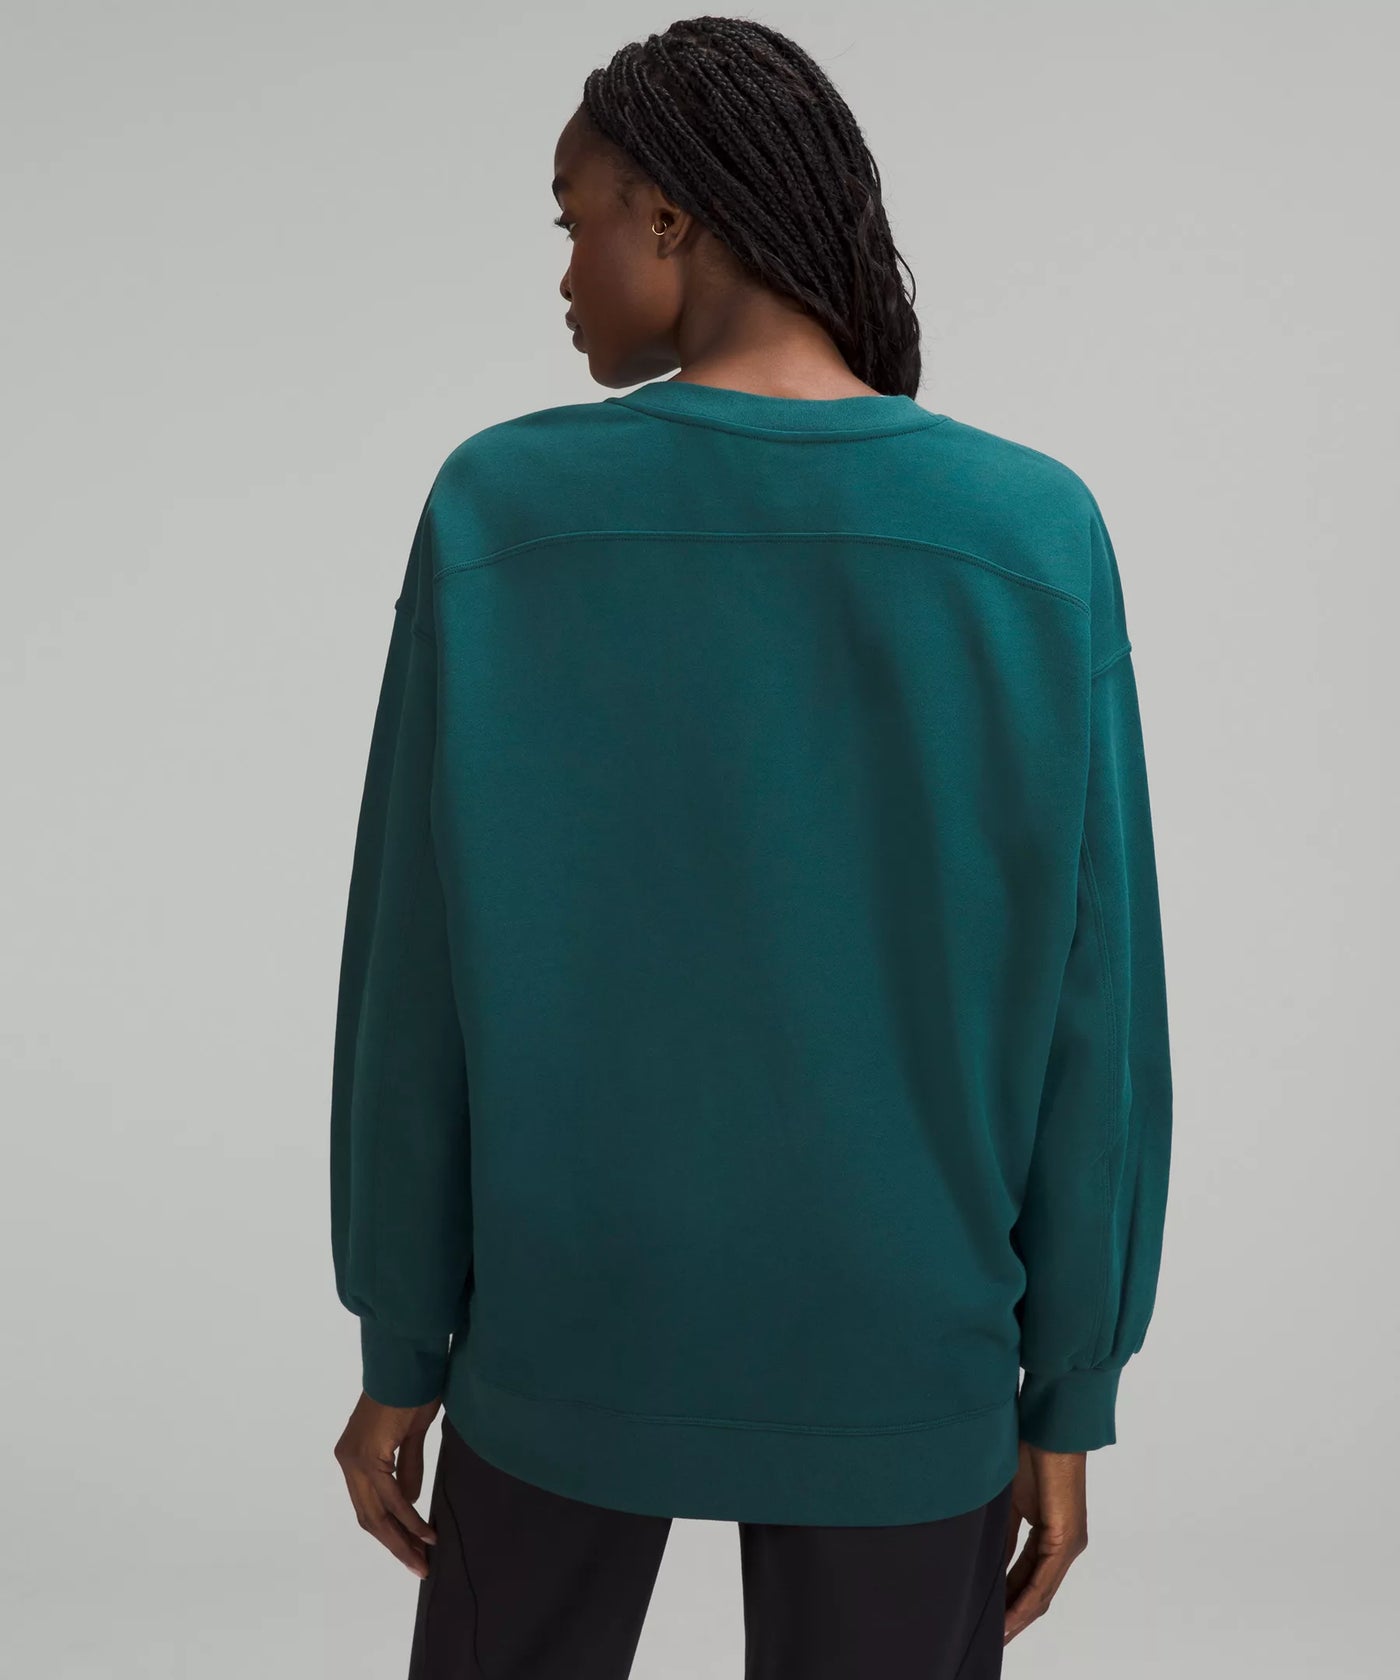 Pre Loved, Lululemon Perfectly Oversized Crew, Storm Teal